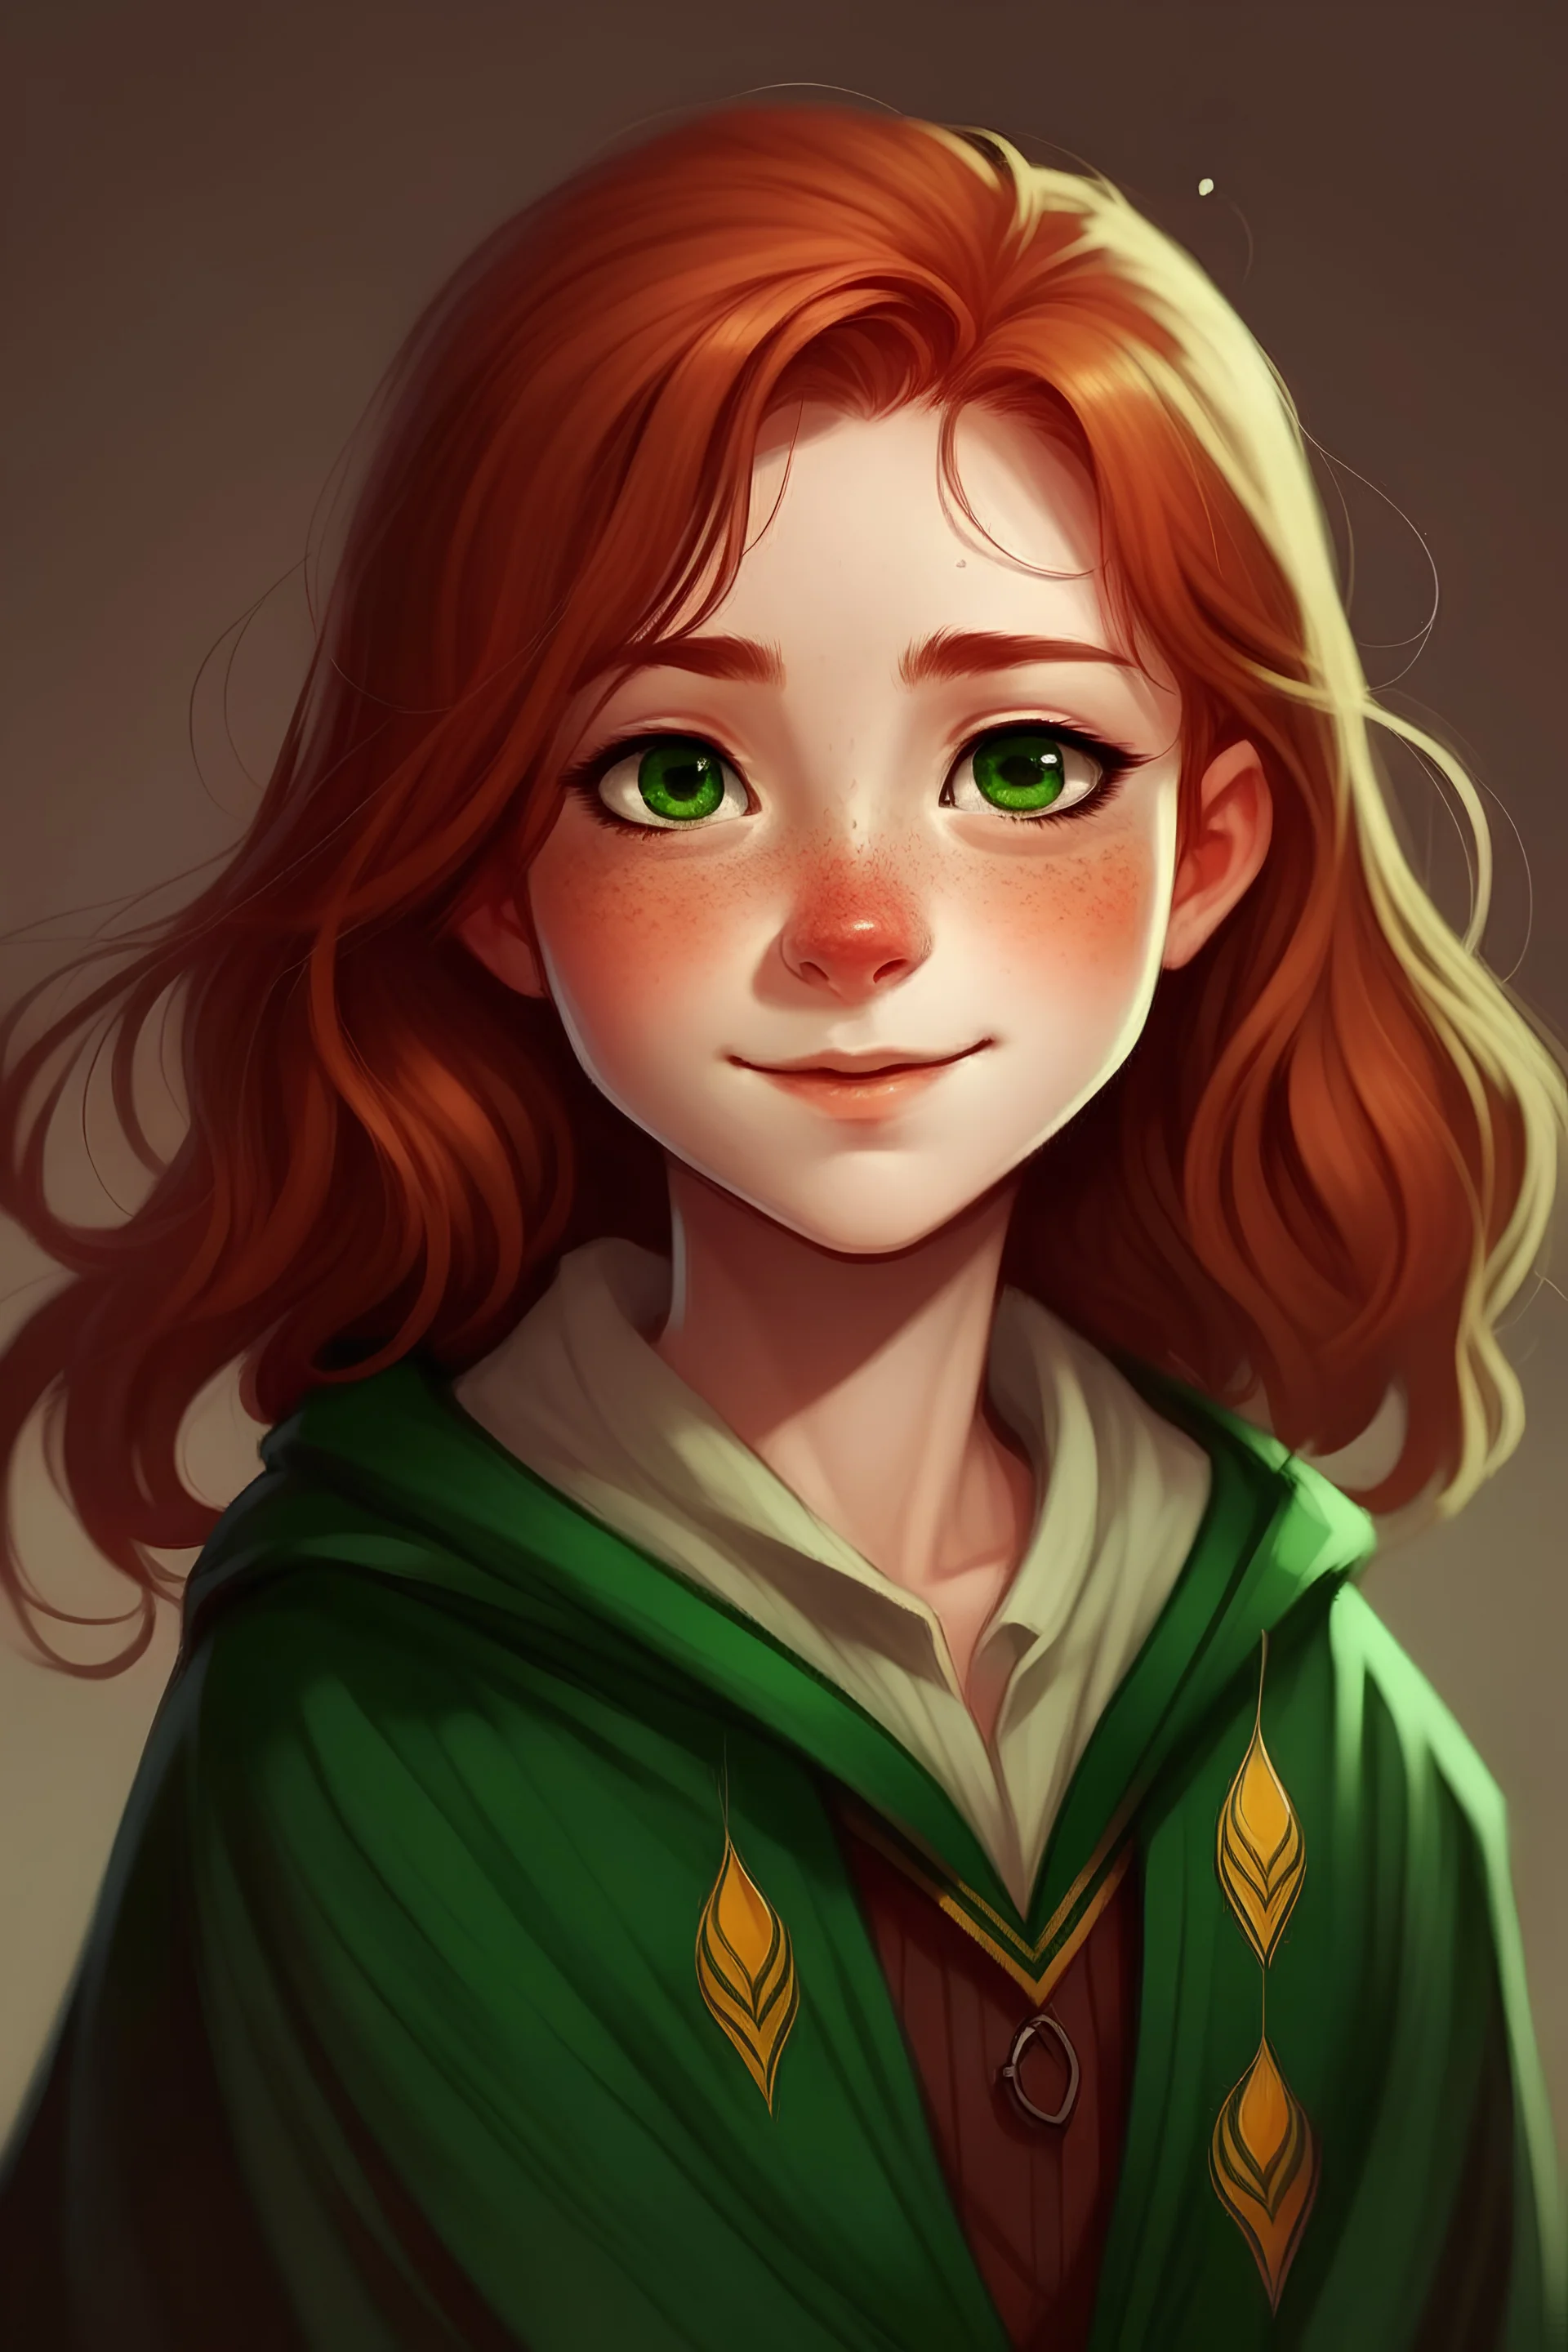 A cute girl with red hair and green eyes and she is wearing a Hogwarts robe